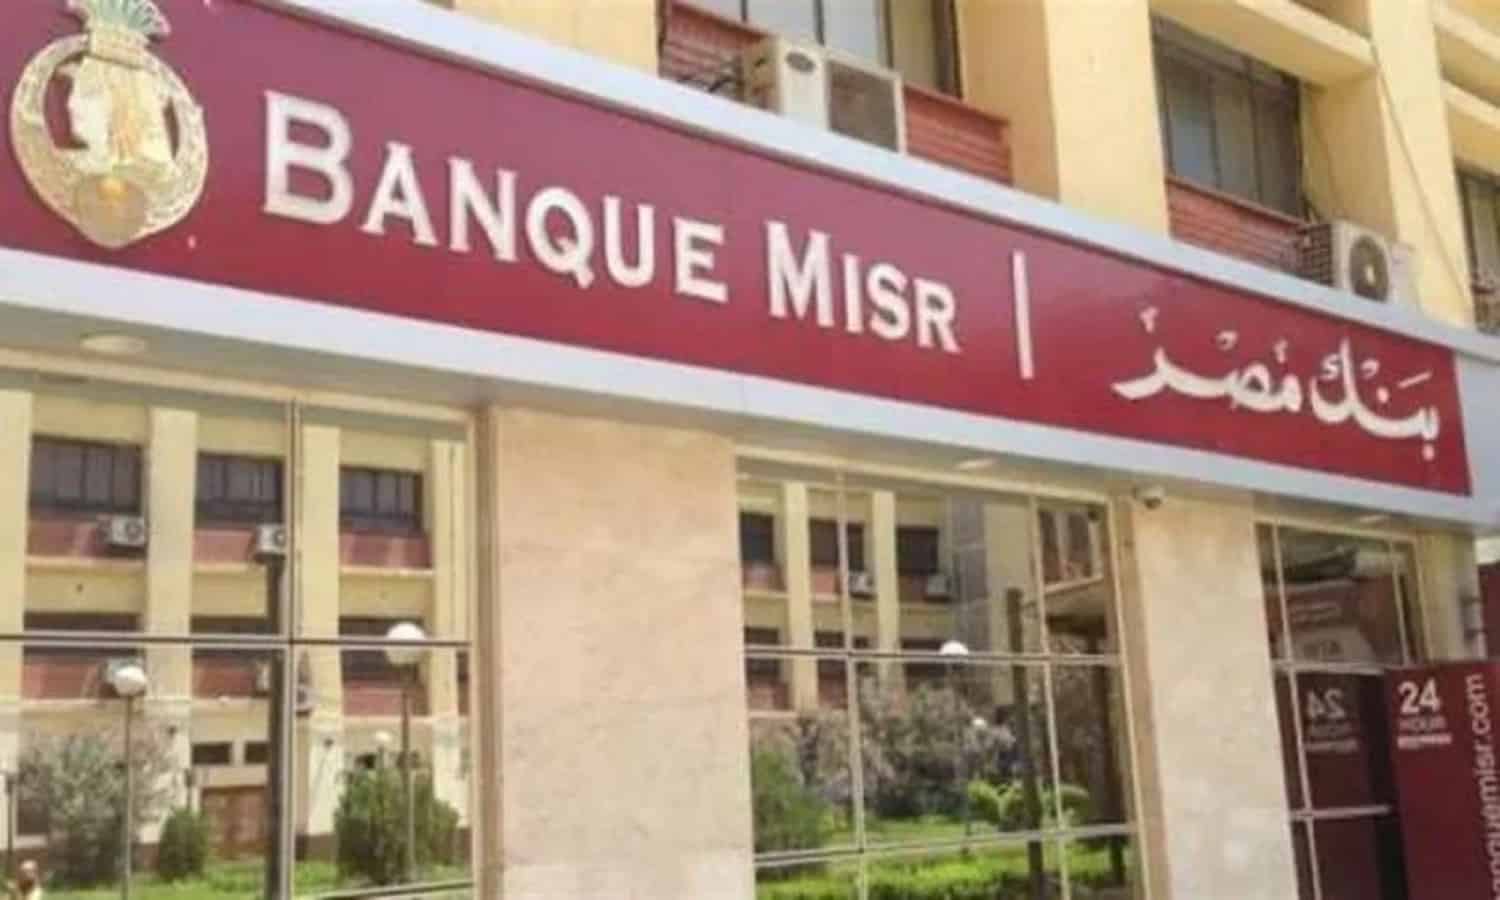 Banque Misr exits Pachin in EGP 100M deal